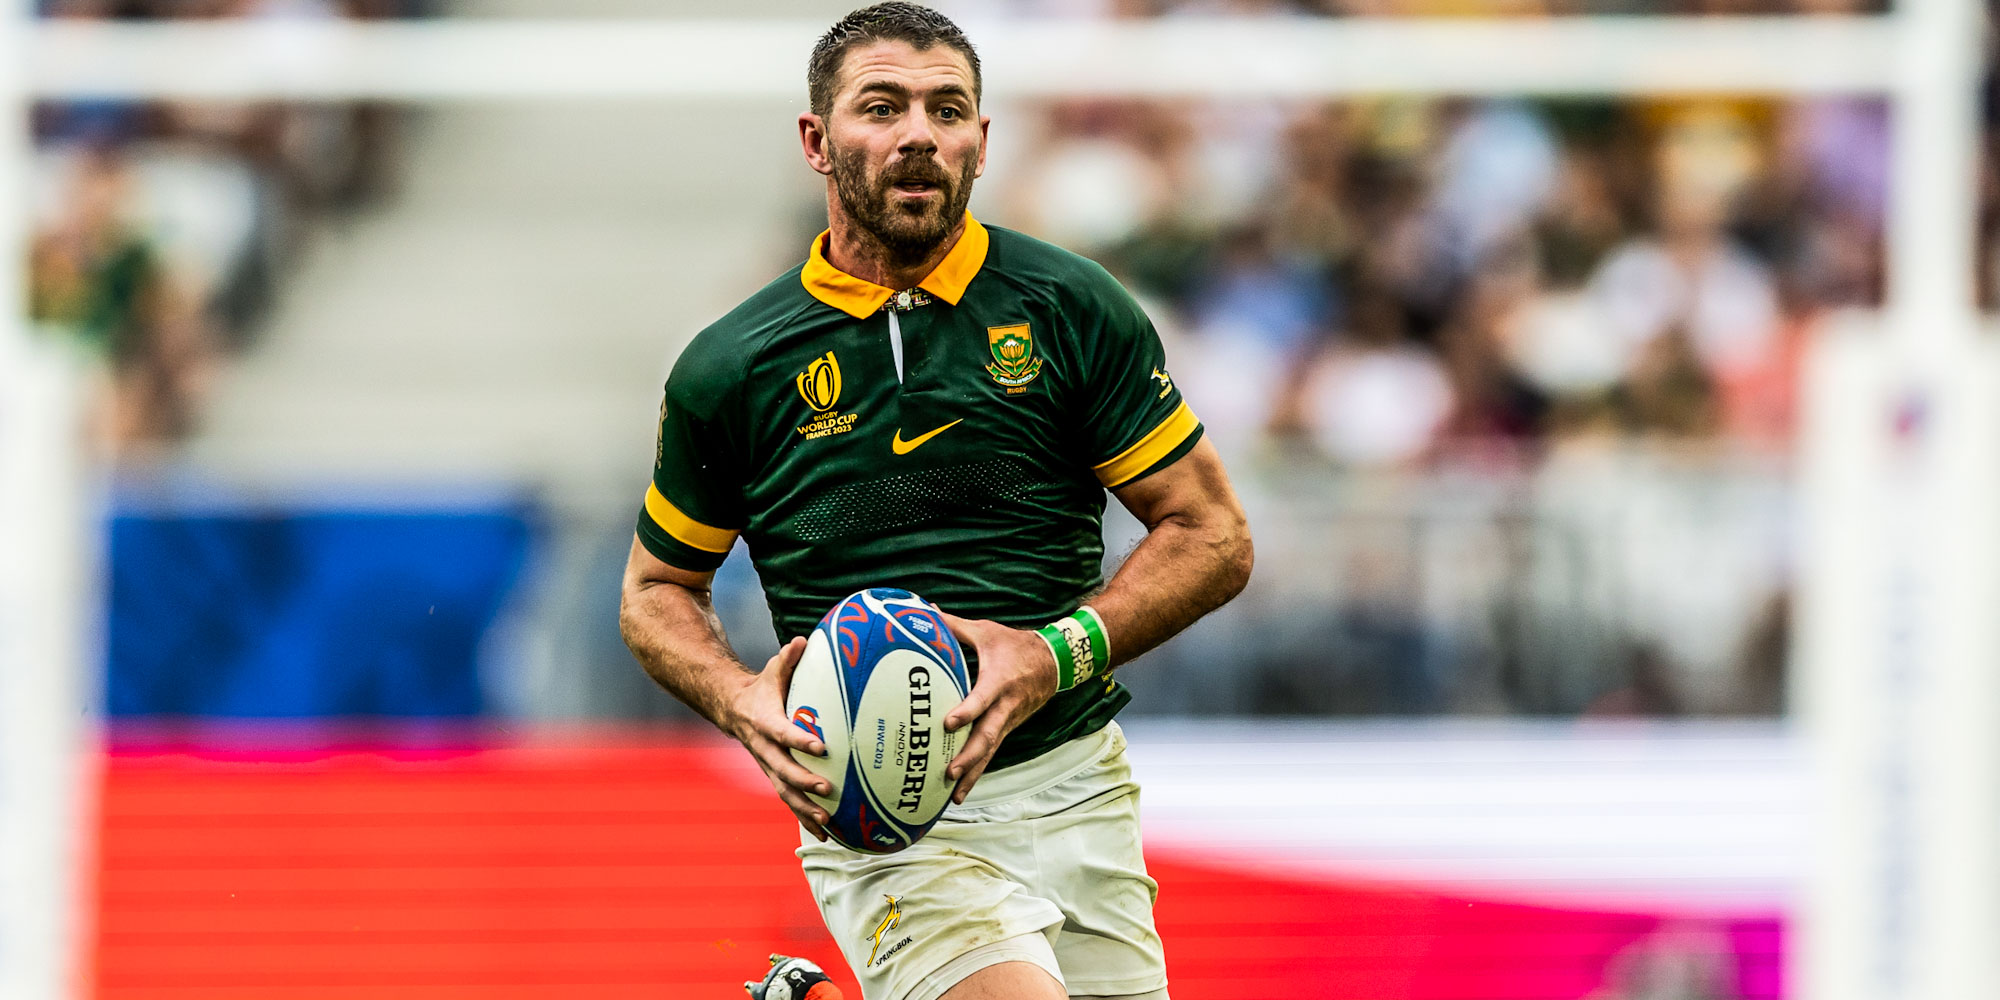 Willie le Roux will earn his 90th Test cap - and first against Tonga - on Sunday.